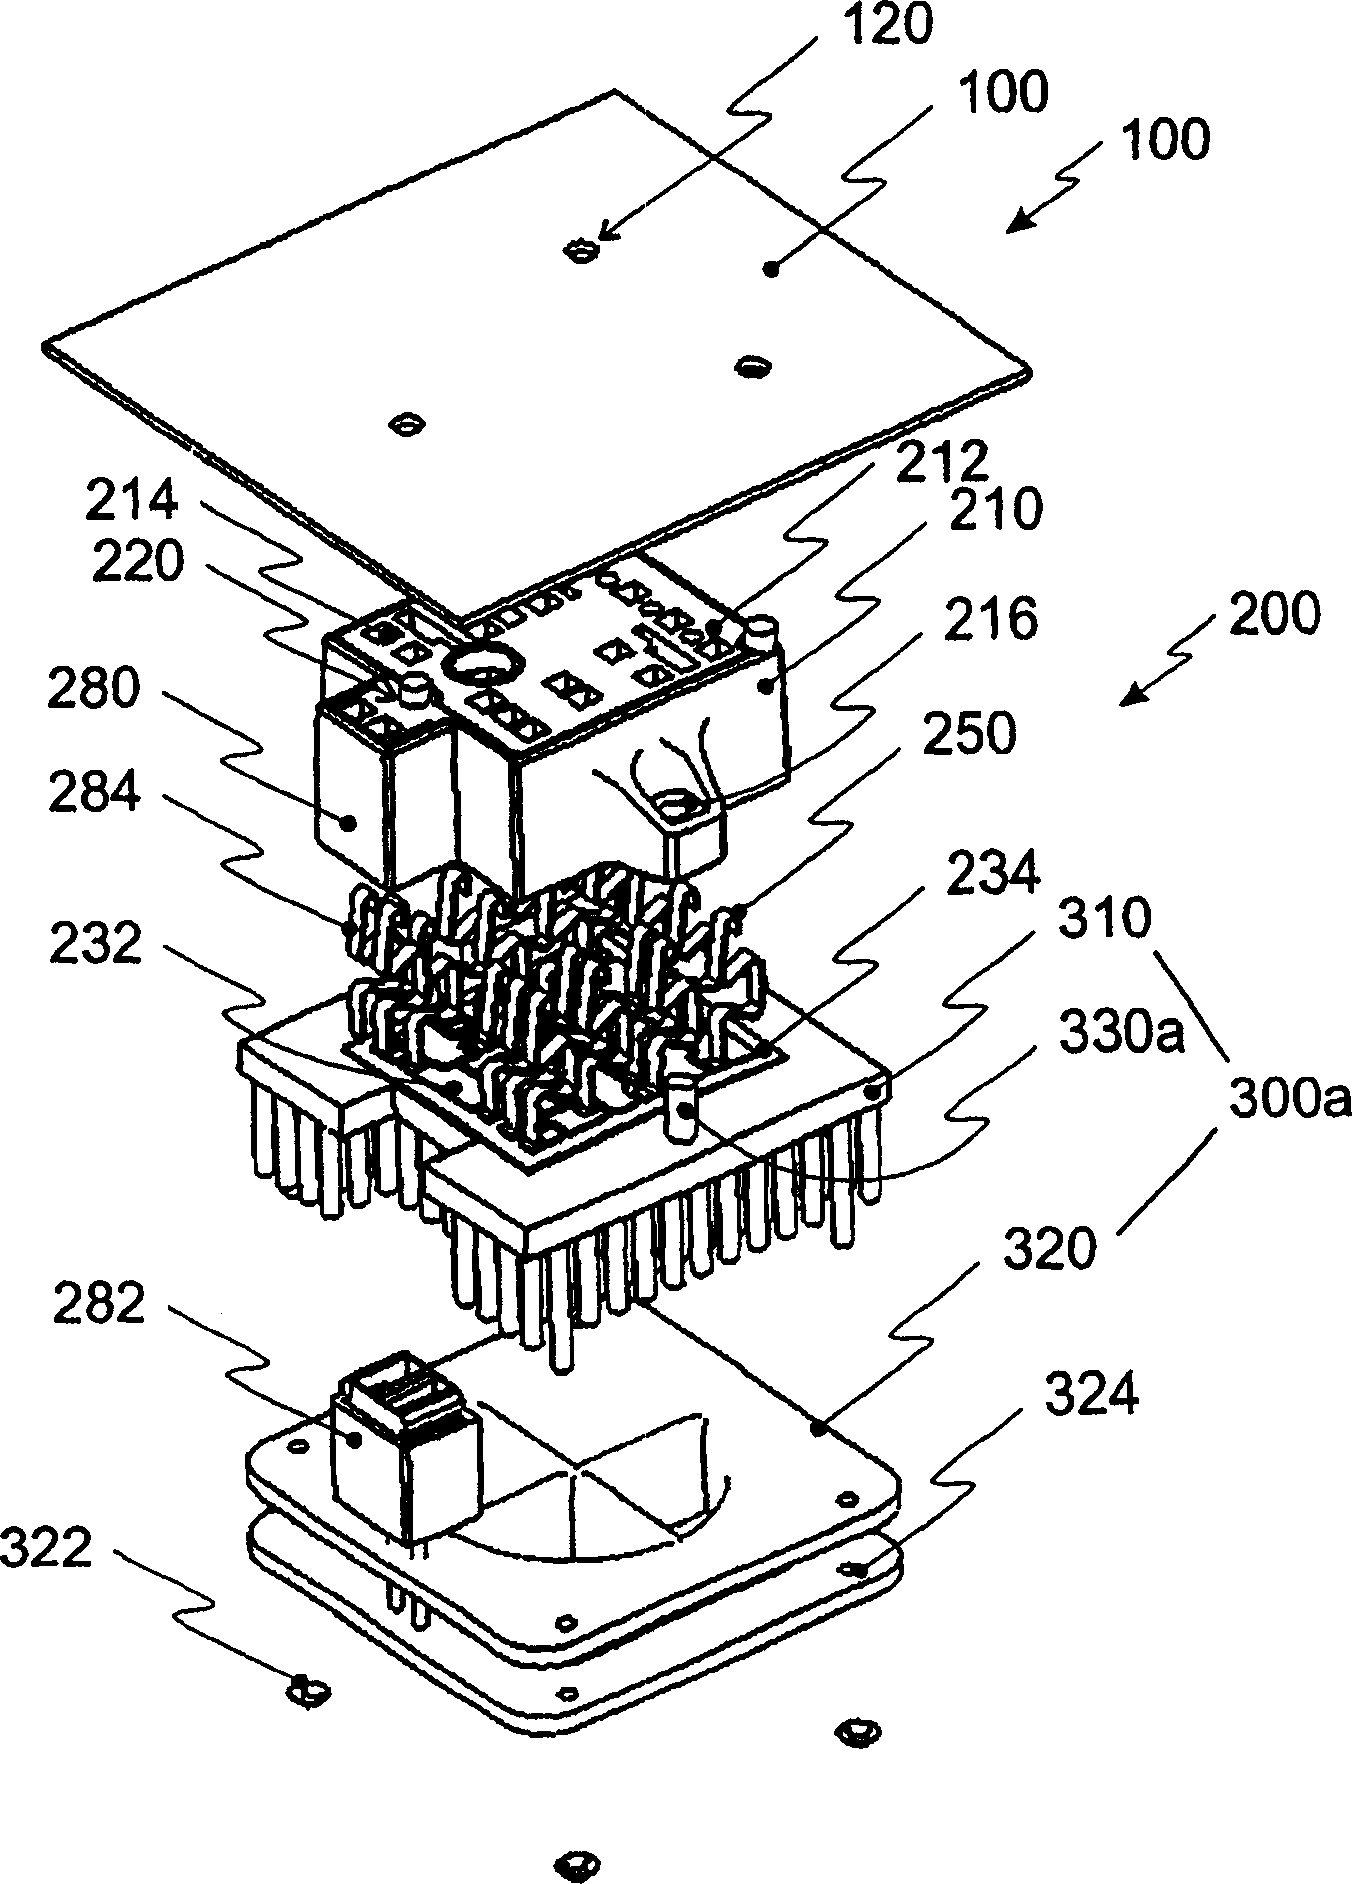 Structure of forming pressure contact with power semiconductor module